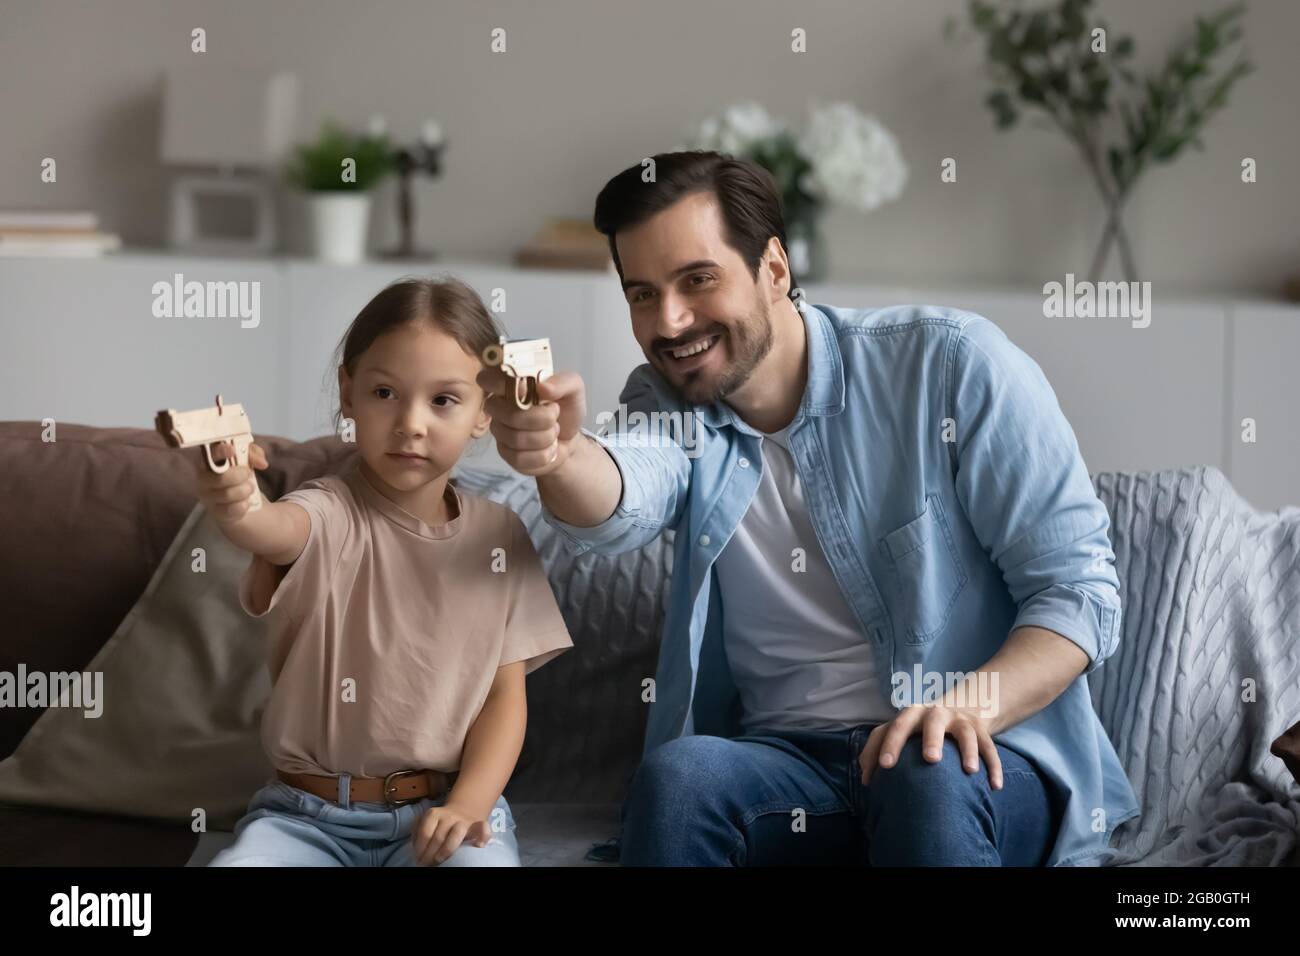 Happy excited dad and daughter kid playing video game Stock Photo